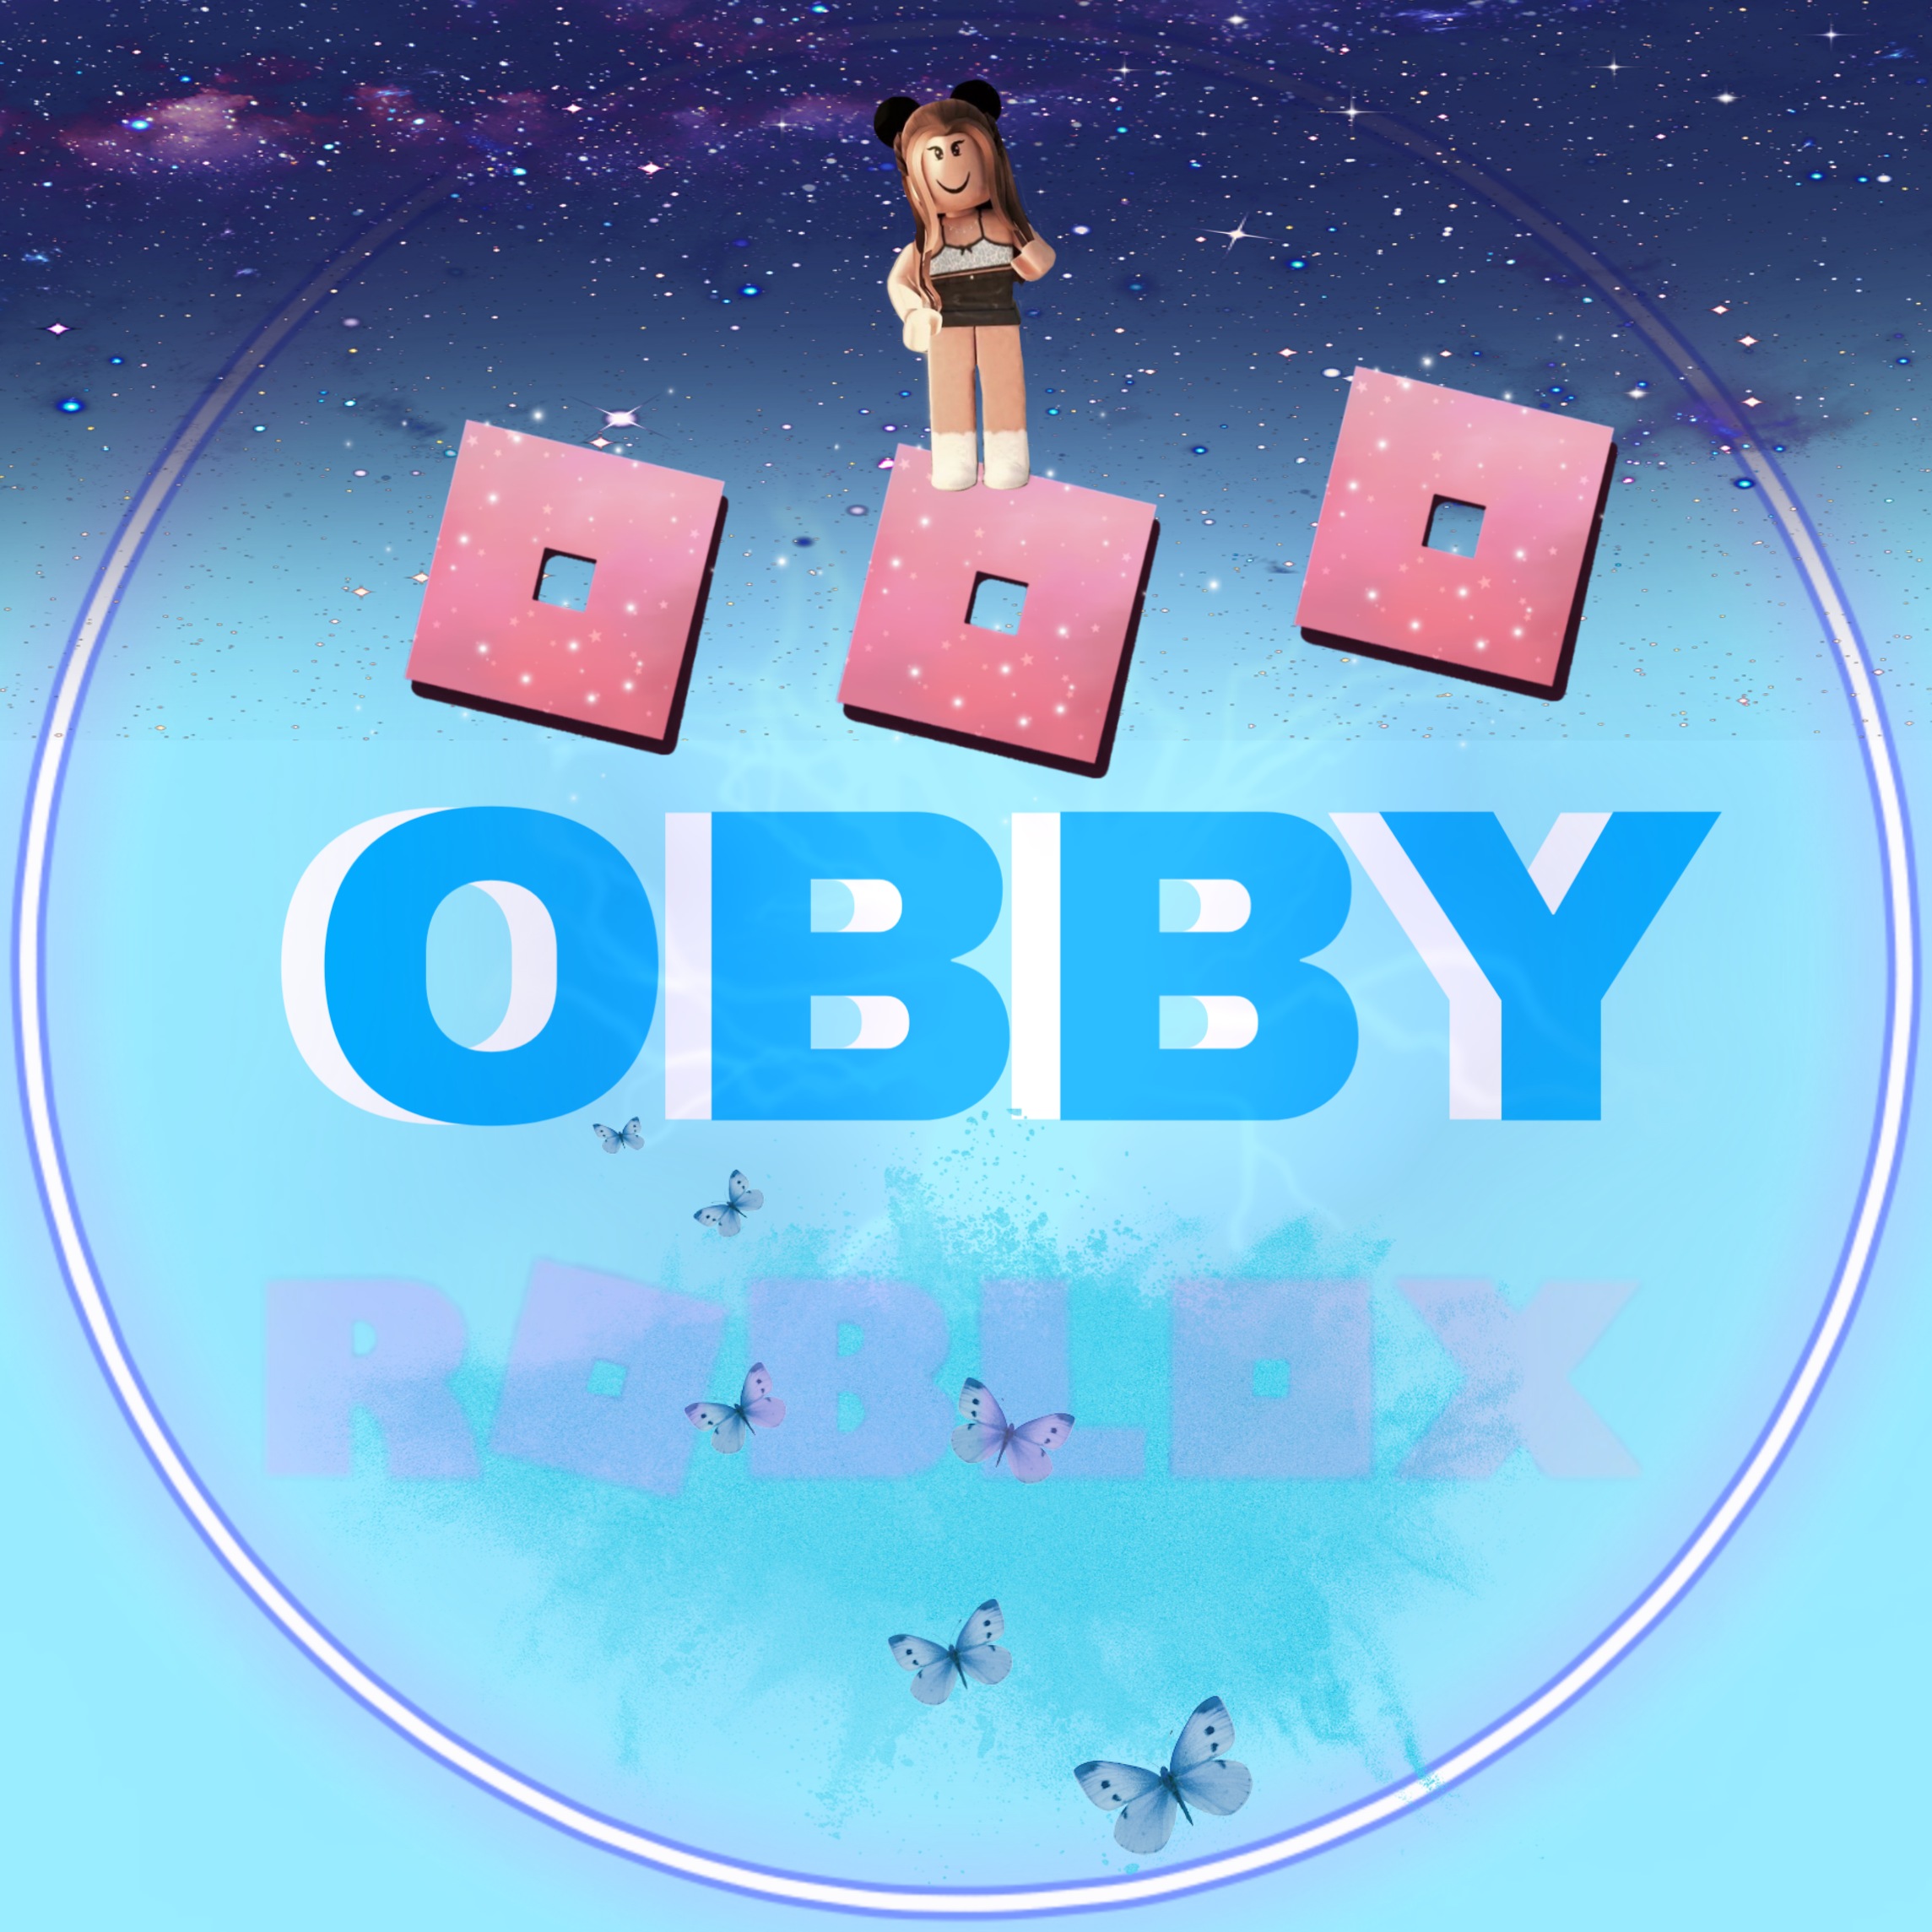 Obby Roblox Image By Haha Gast Hhg - obby roblox imagen